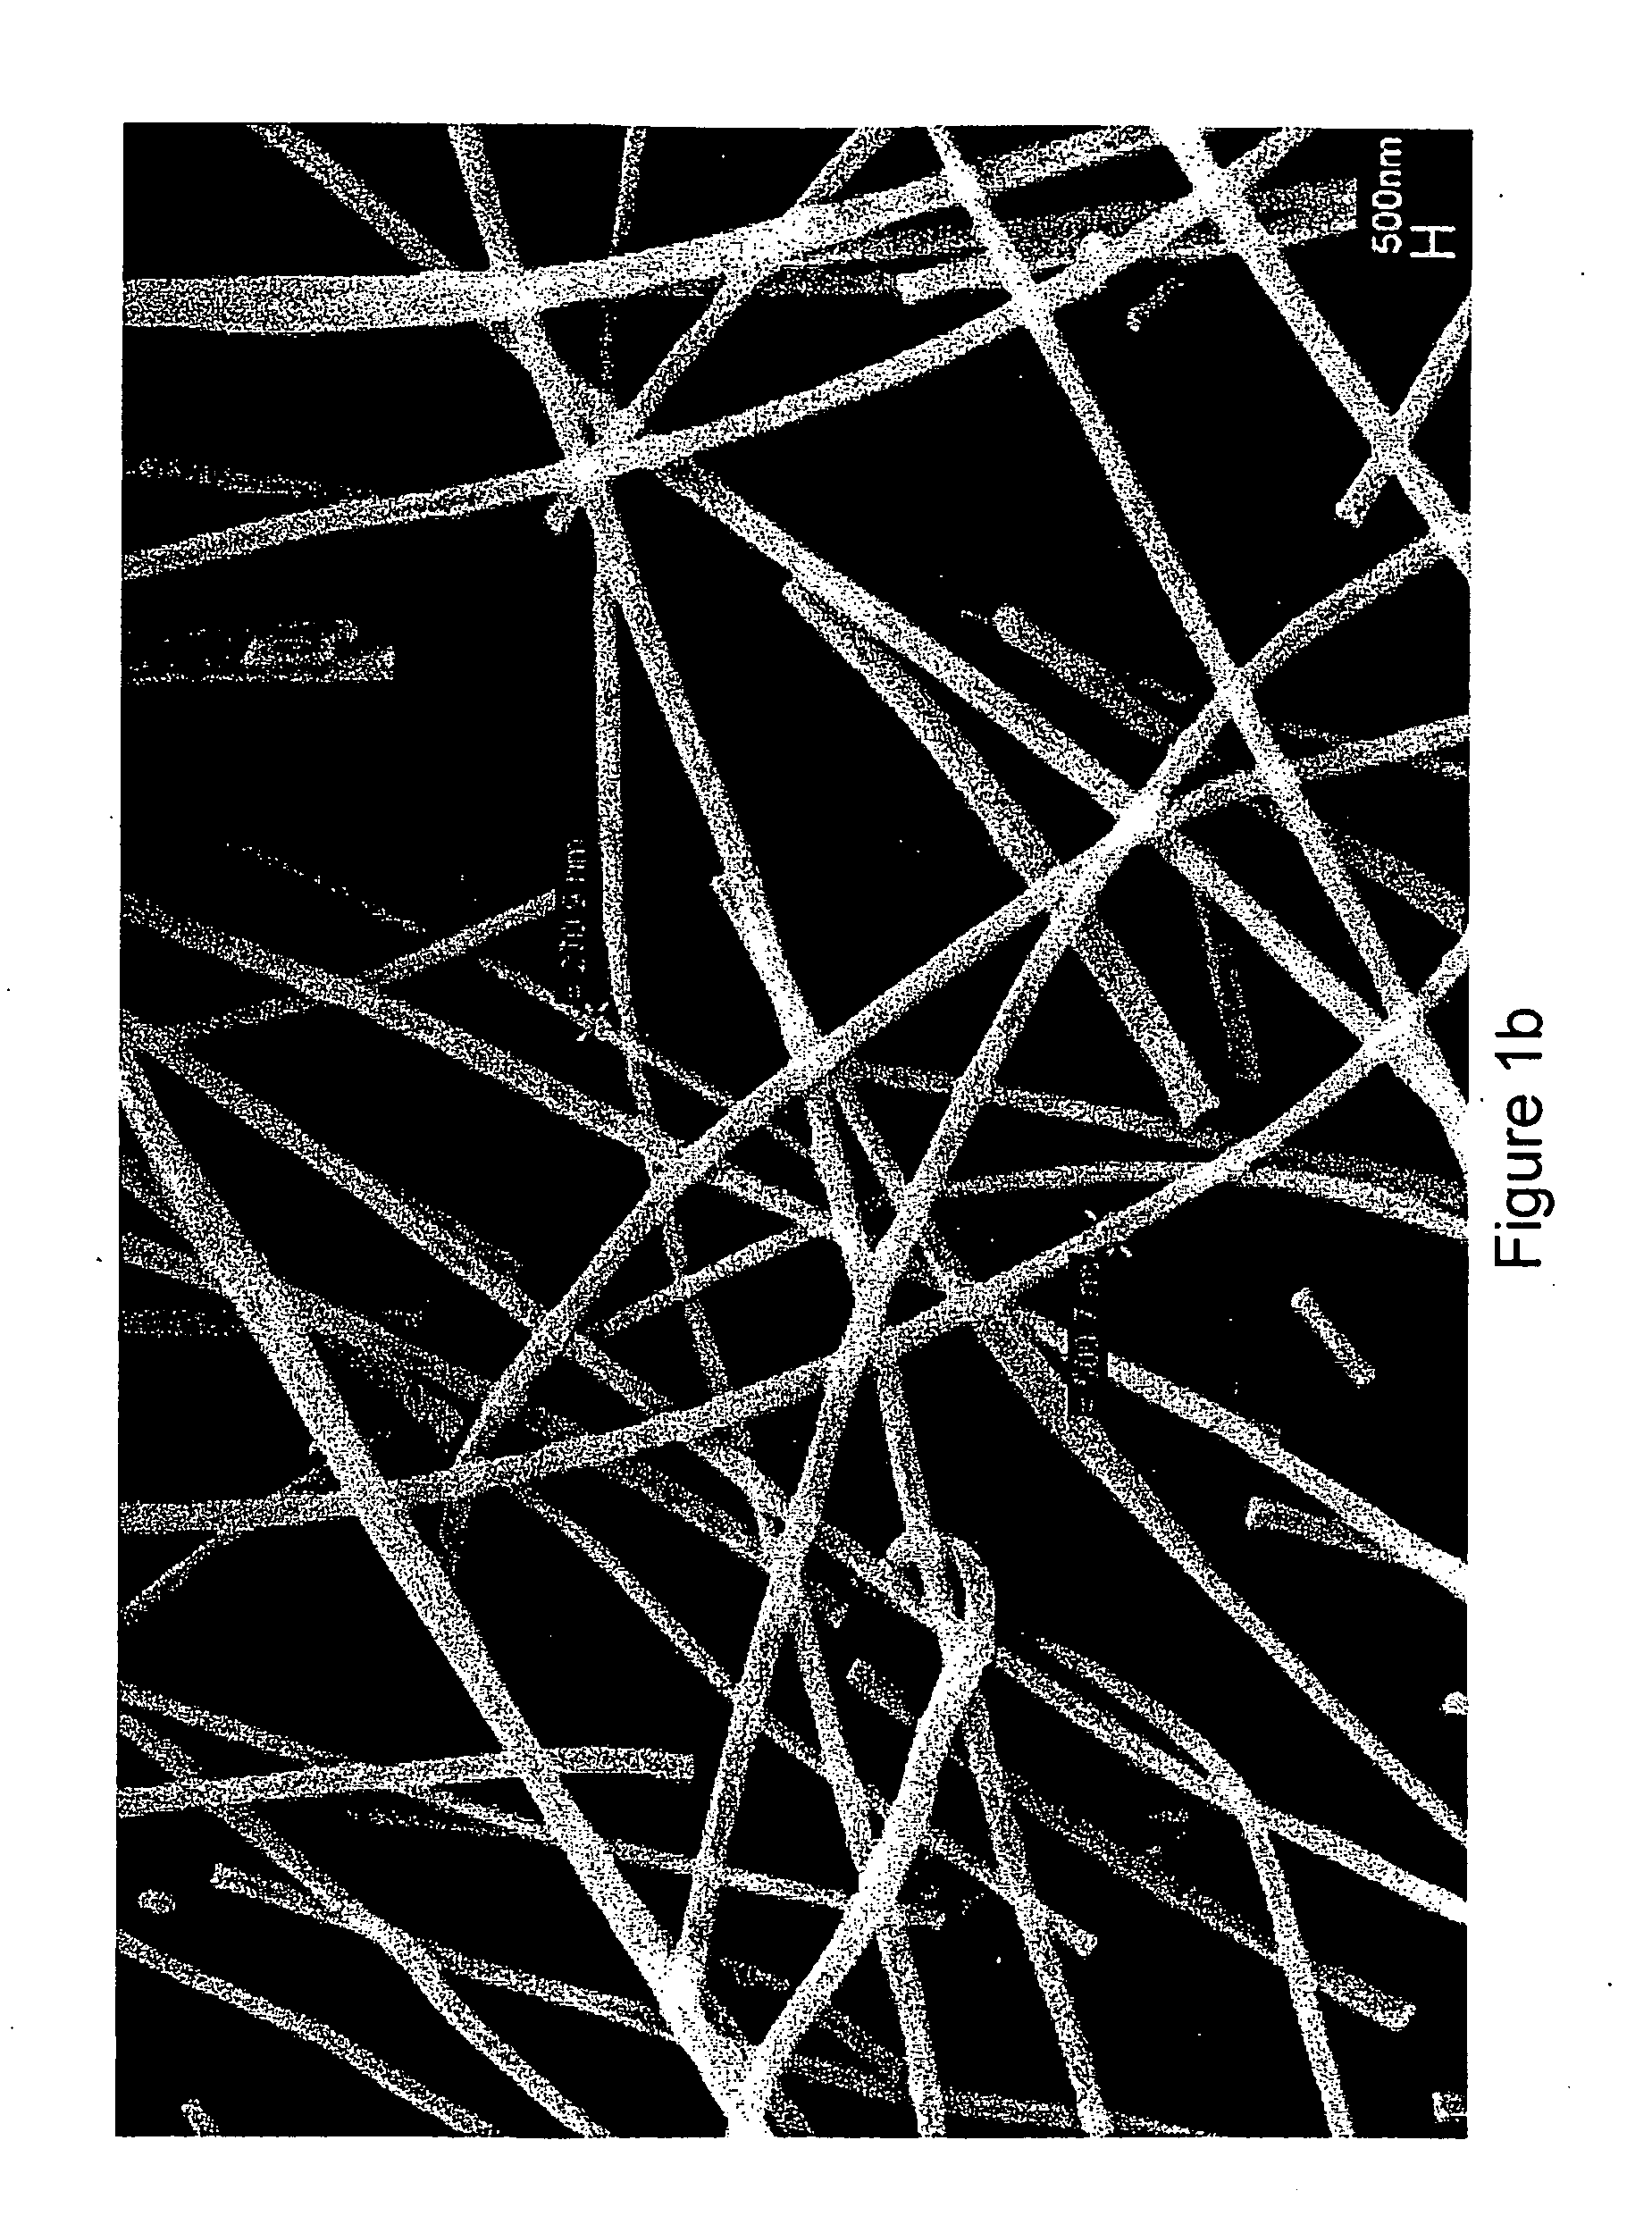 Fibers and methods relating thereto